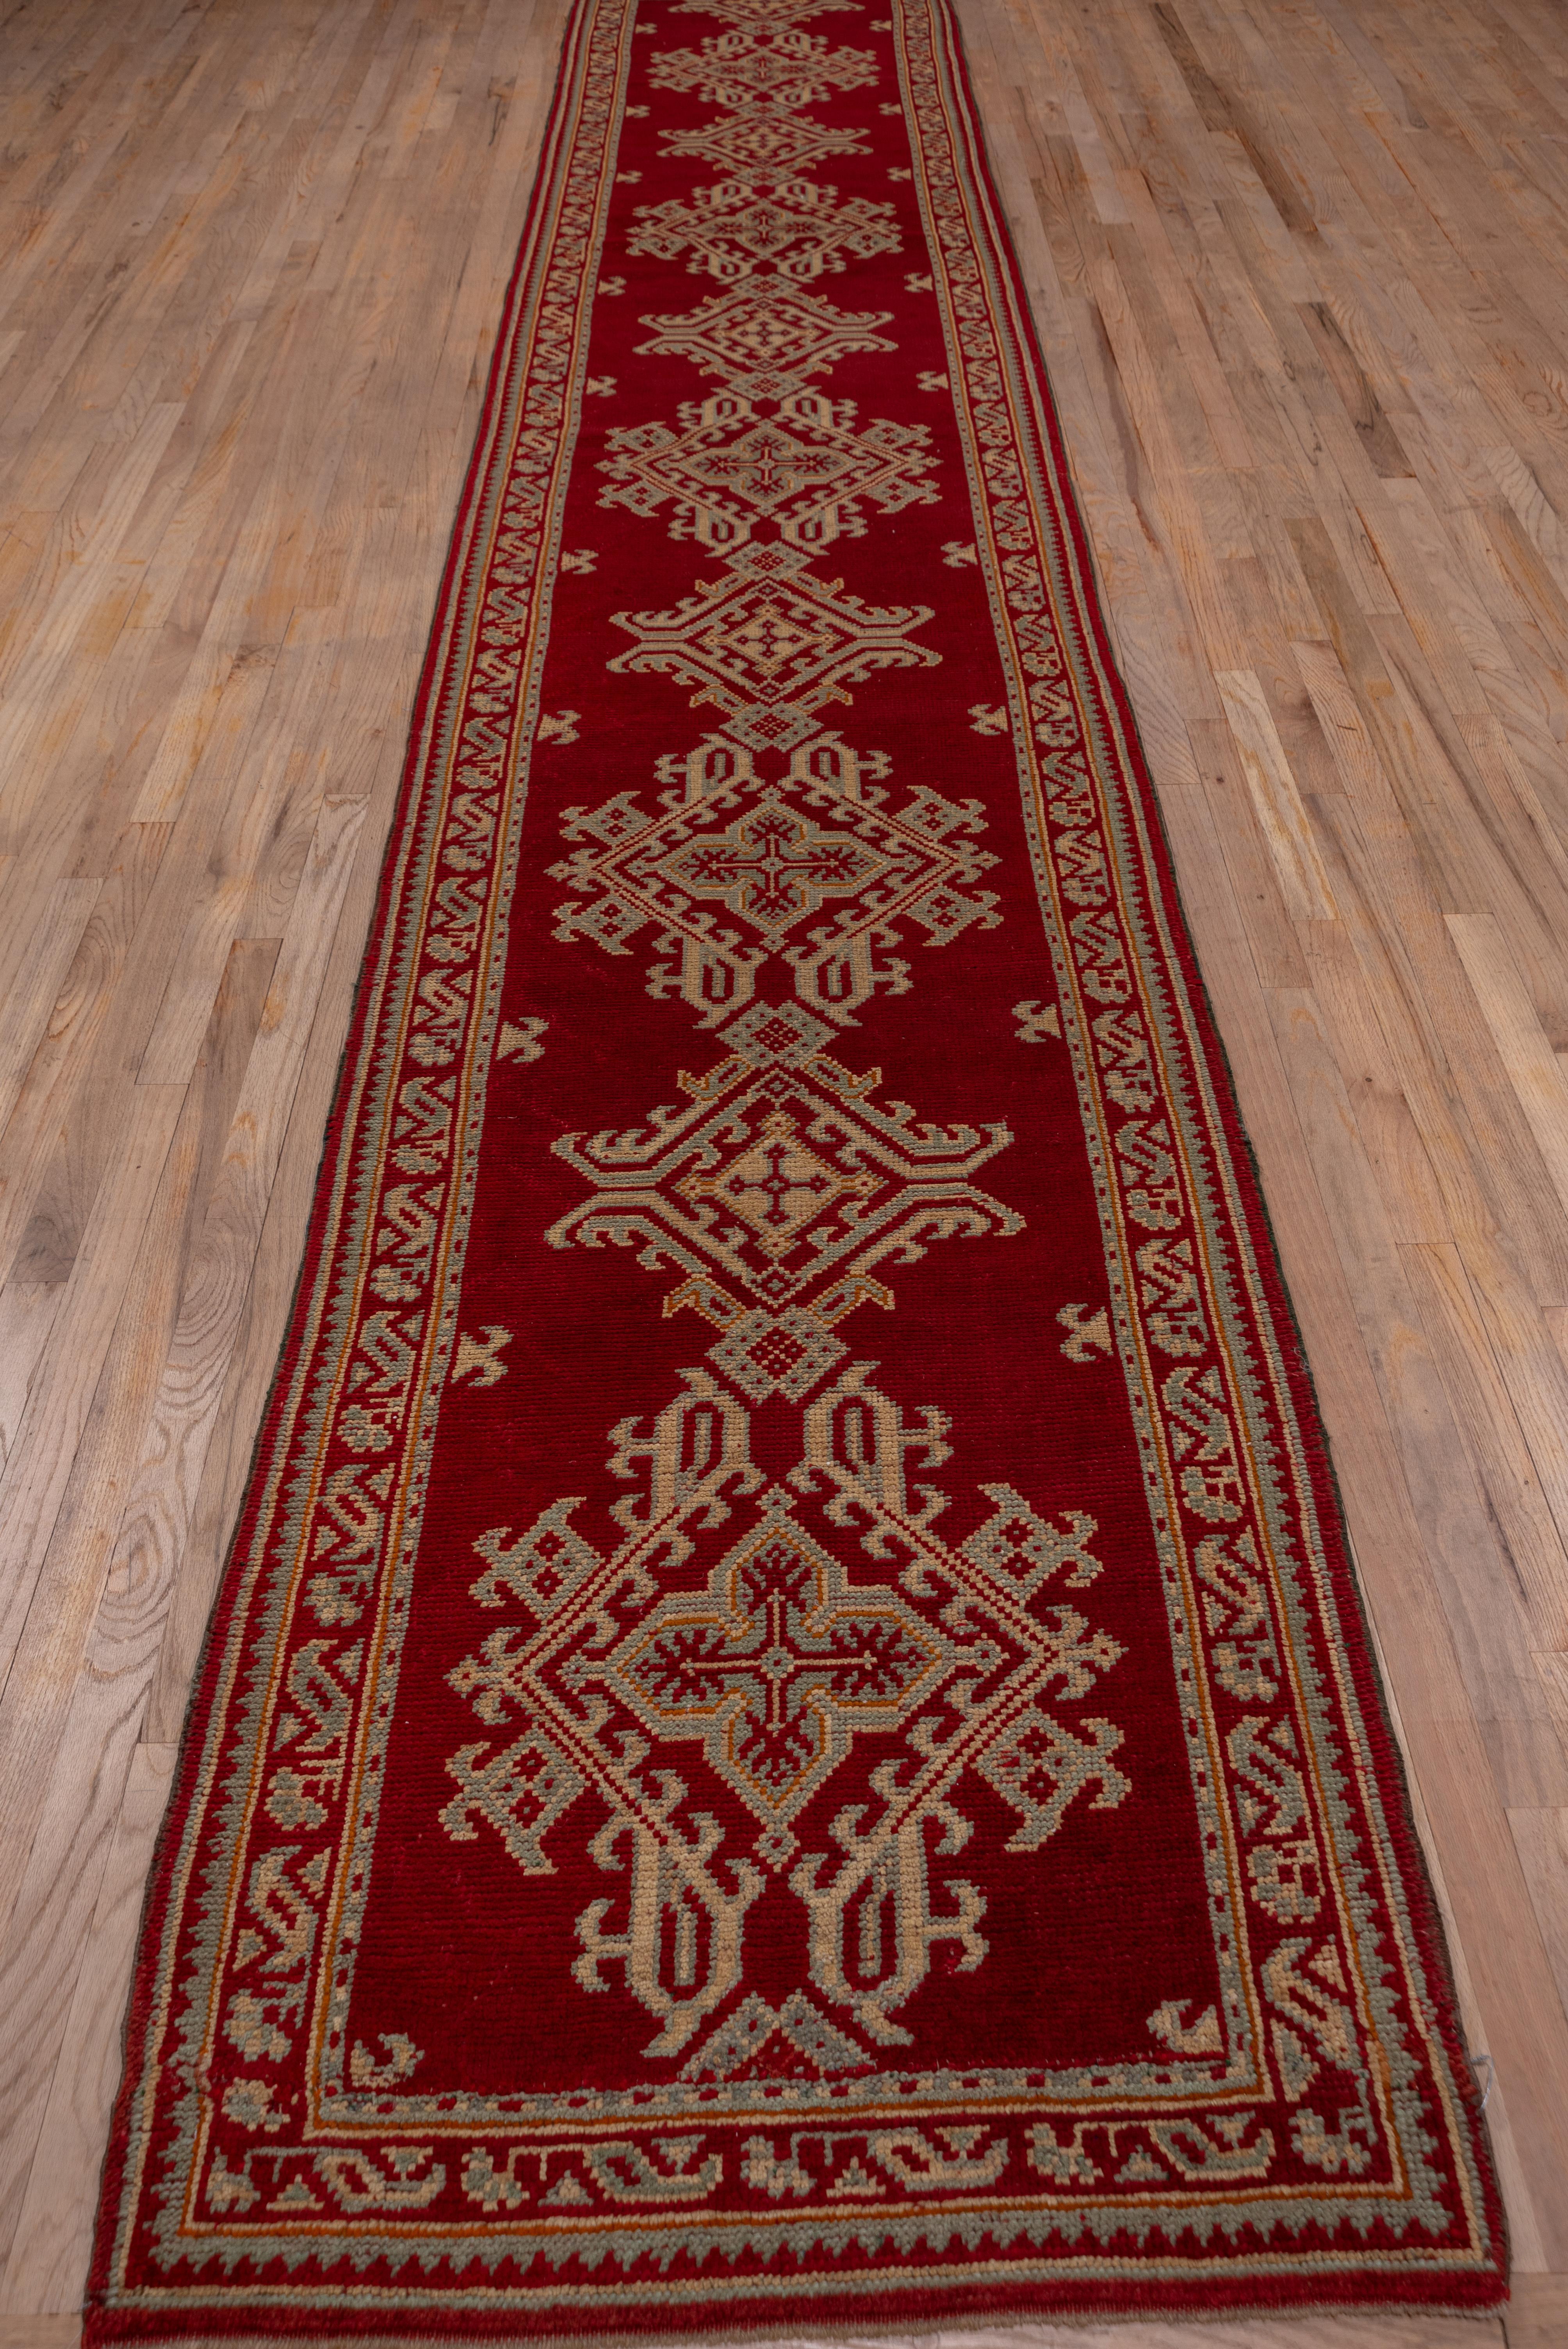 The blood red field of this western Anatolian workshop runner displays a comfortably situated Yaprak (Leaf) pattern accented in powder blue, pale green, light rust and ivory. The blood red border displays discrete leaf/carnation modules.